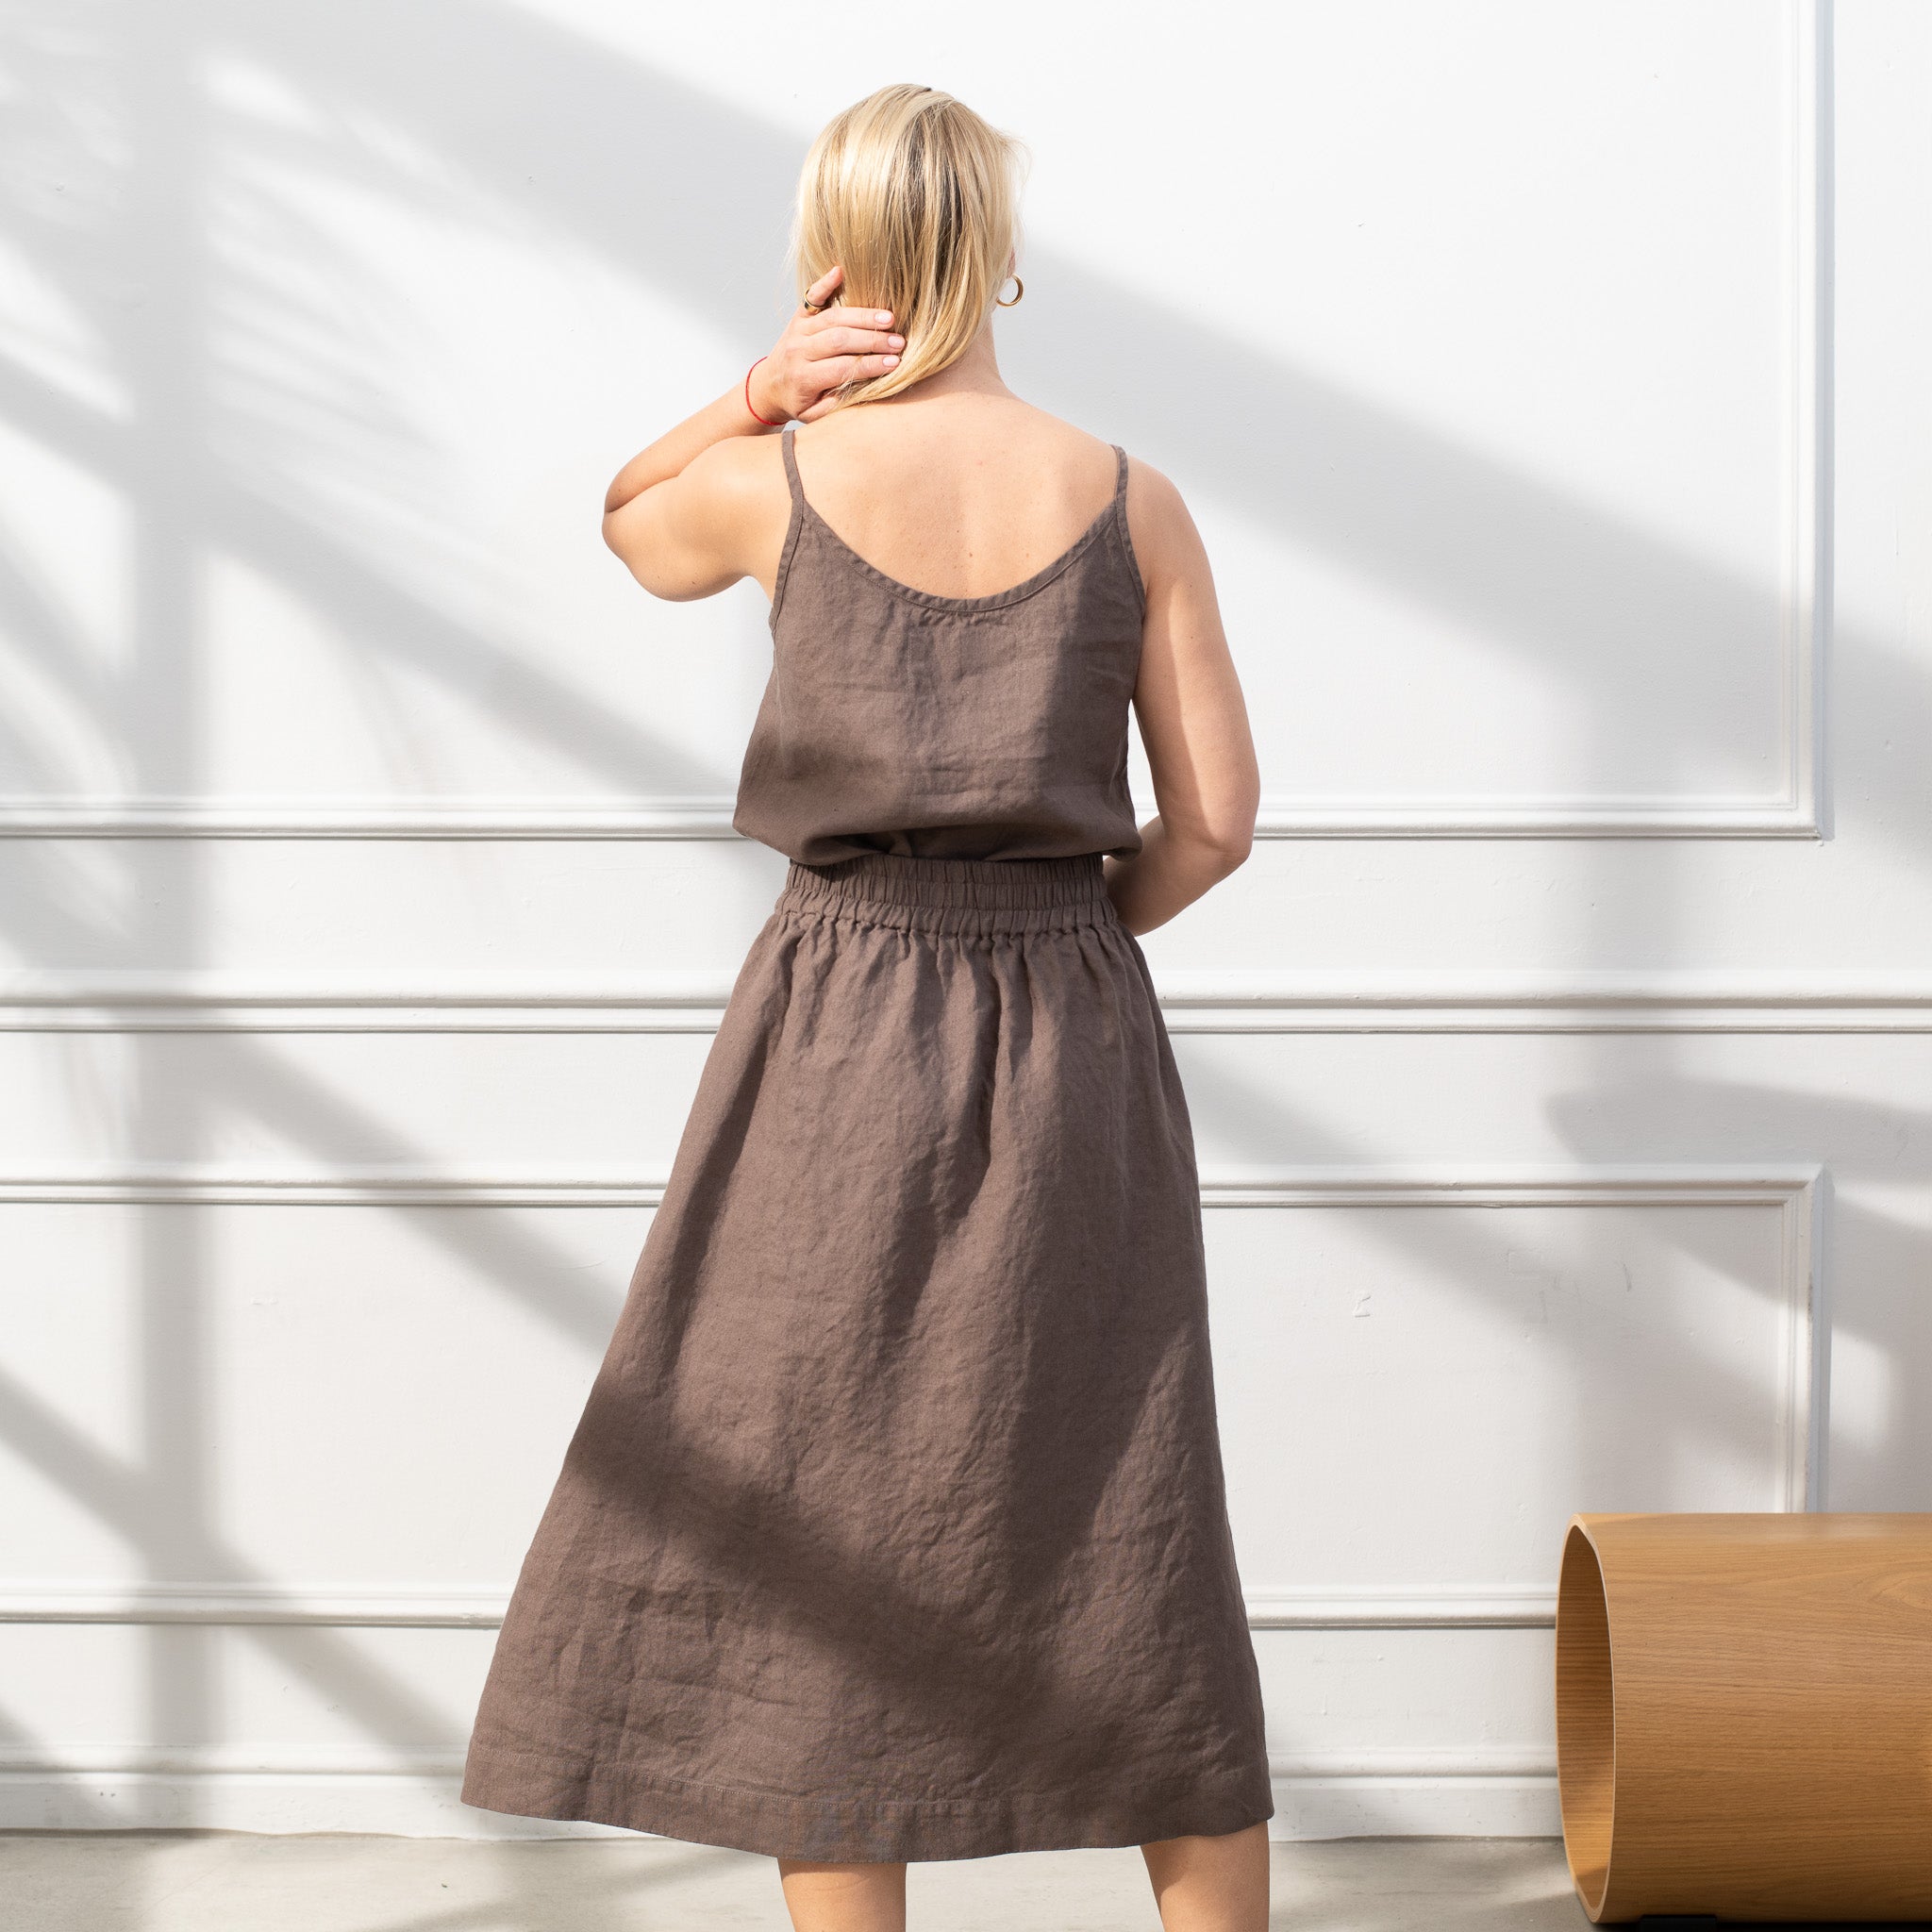 SION gathered linen skirt in Chocolate